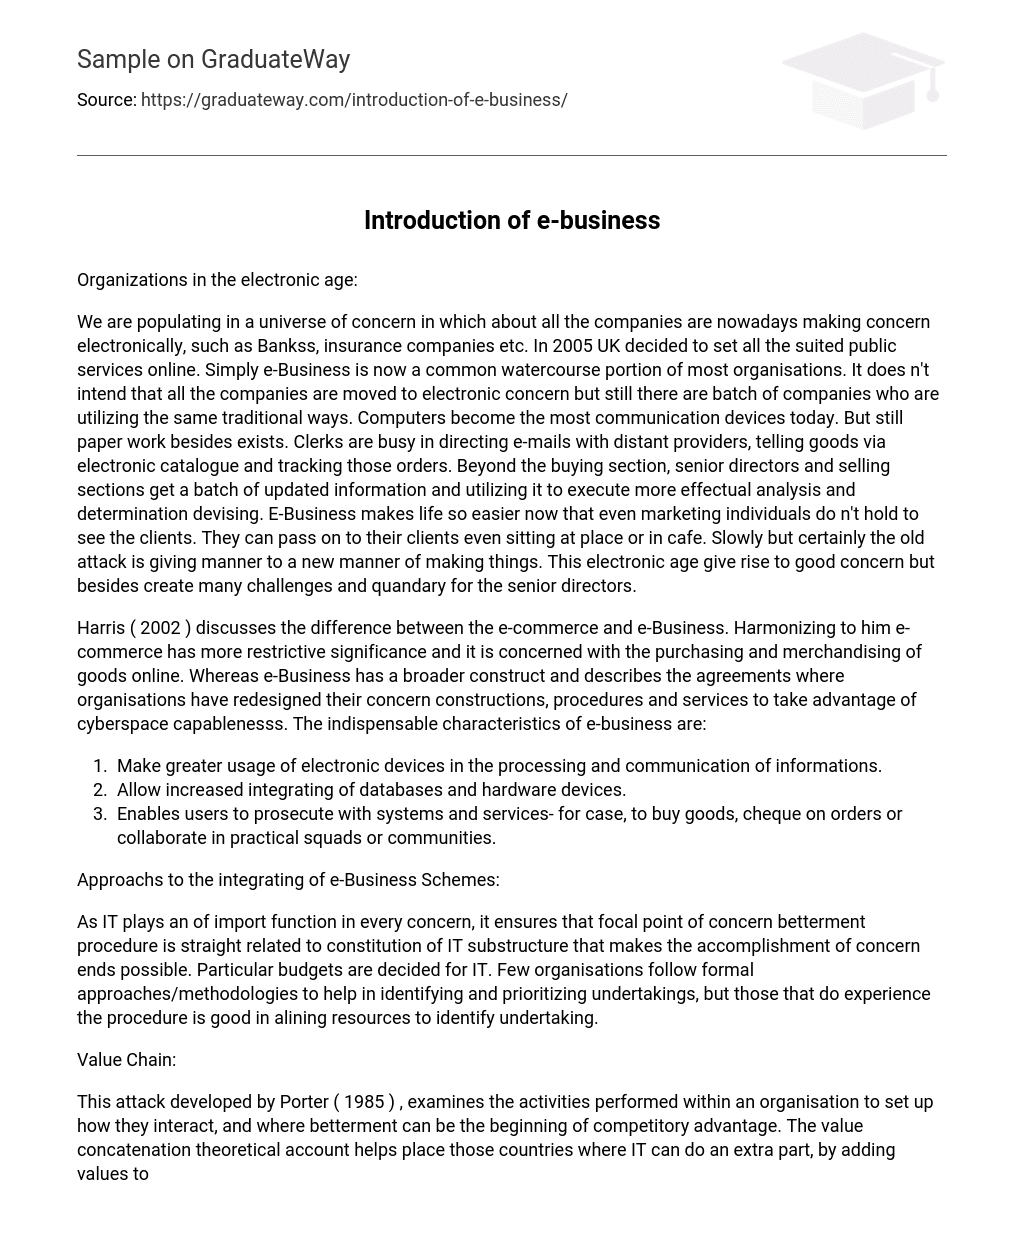 Introduction of e-business